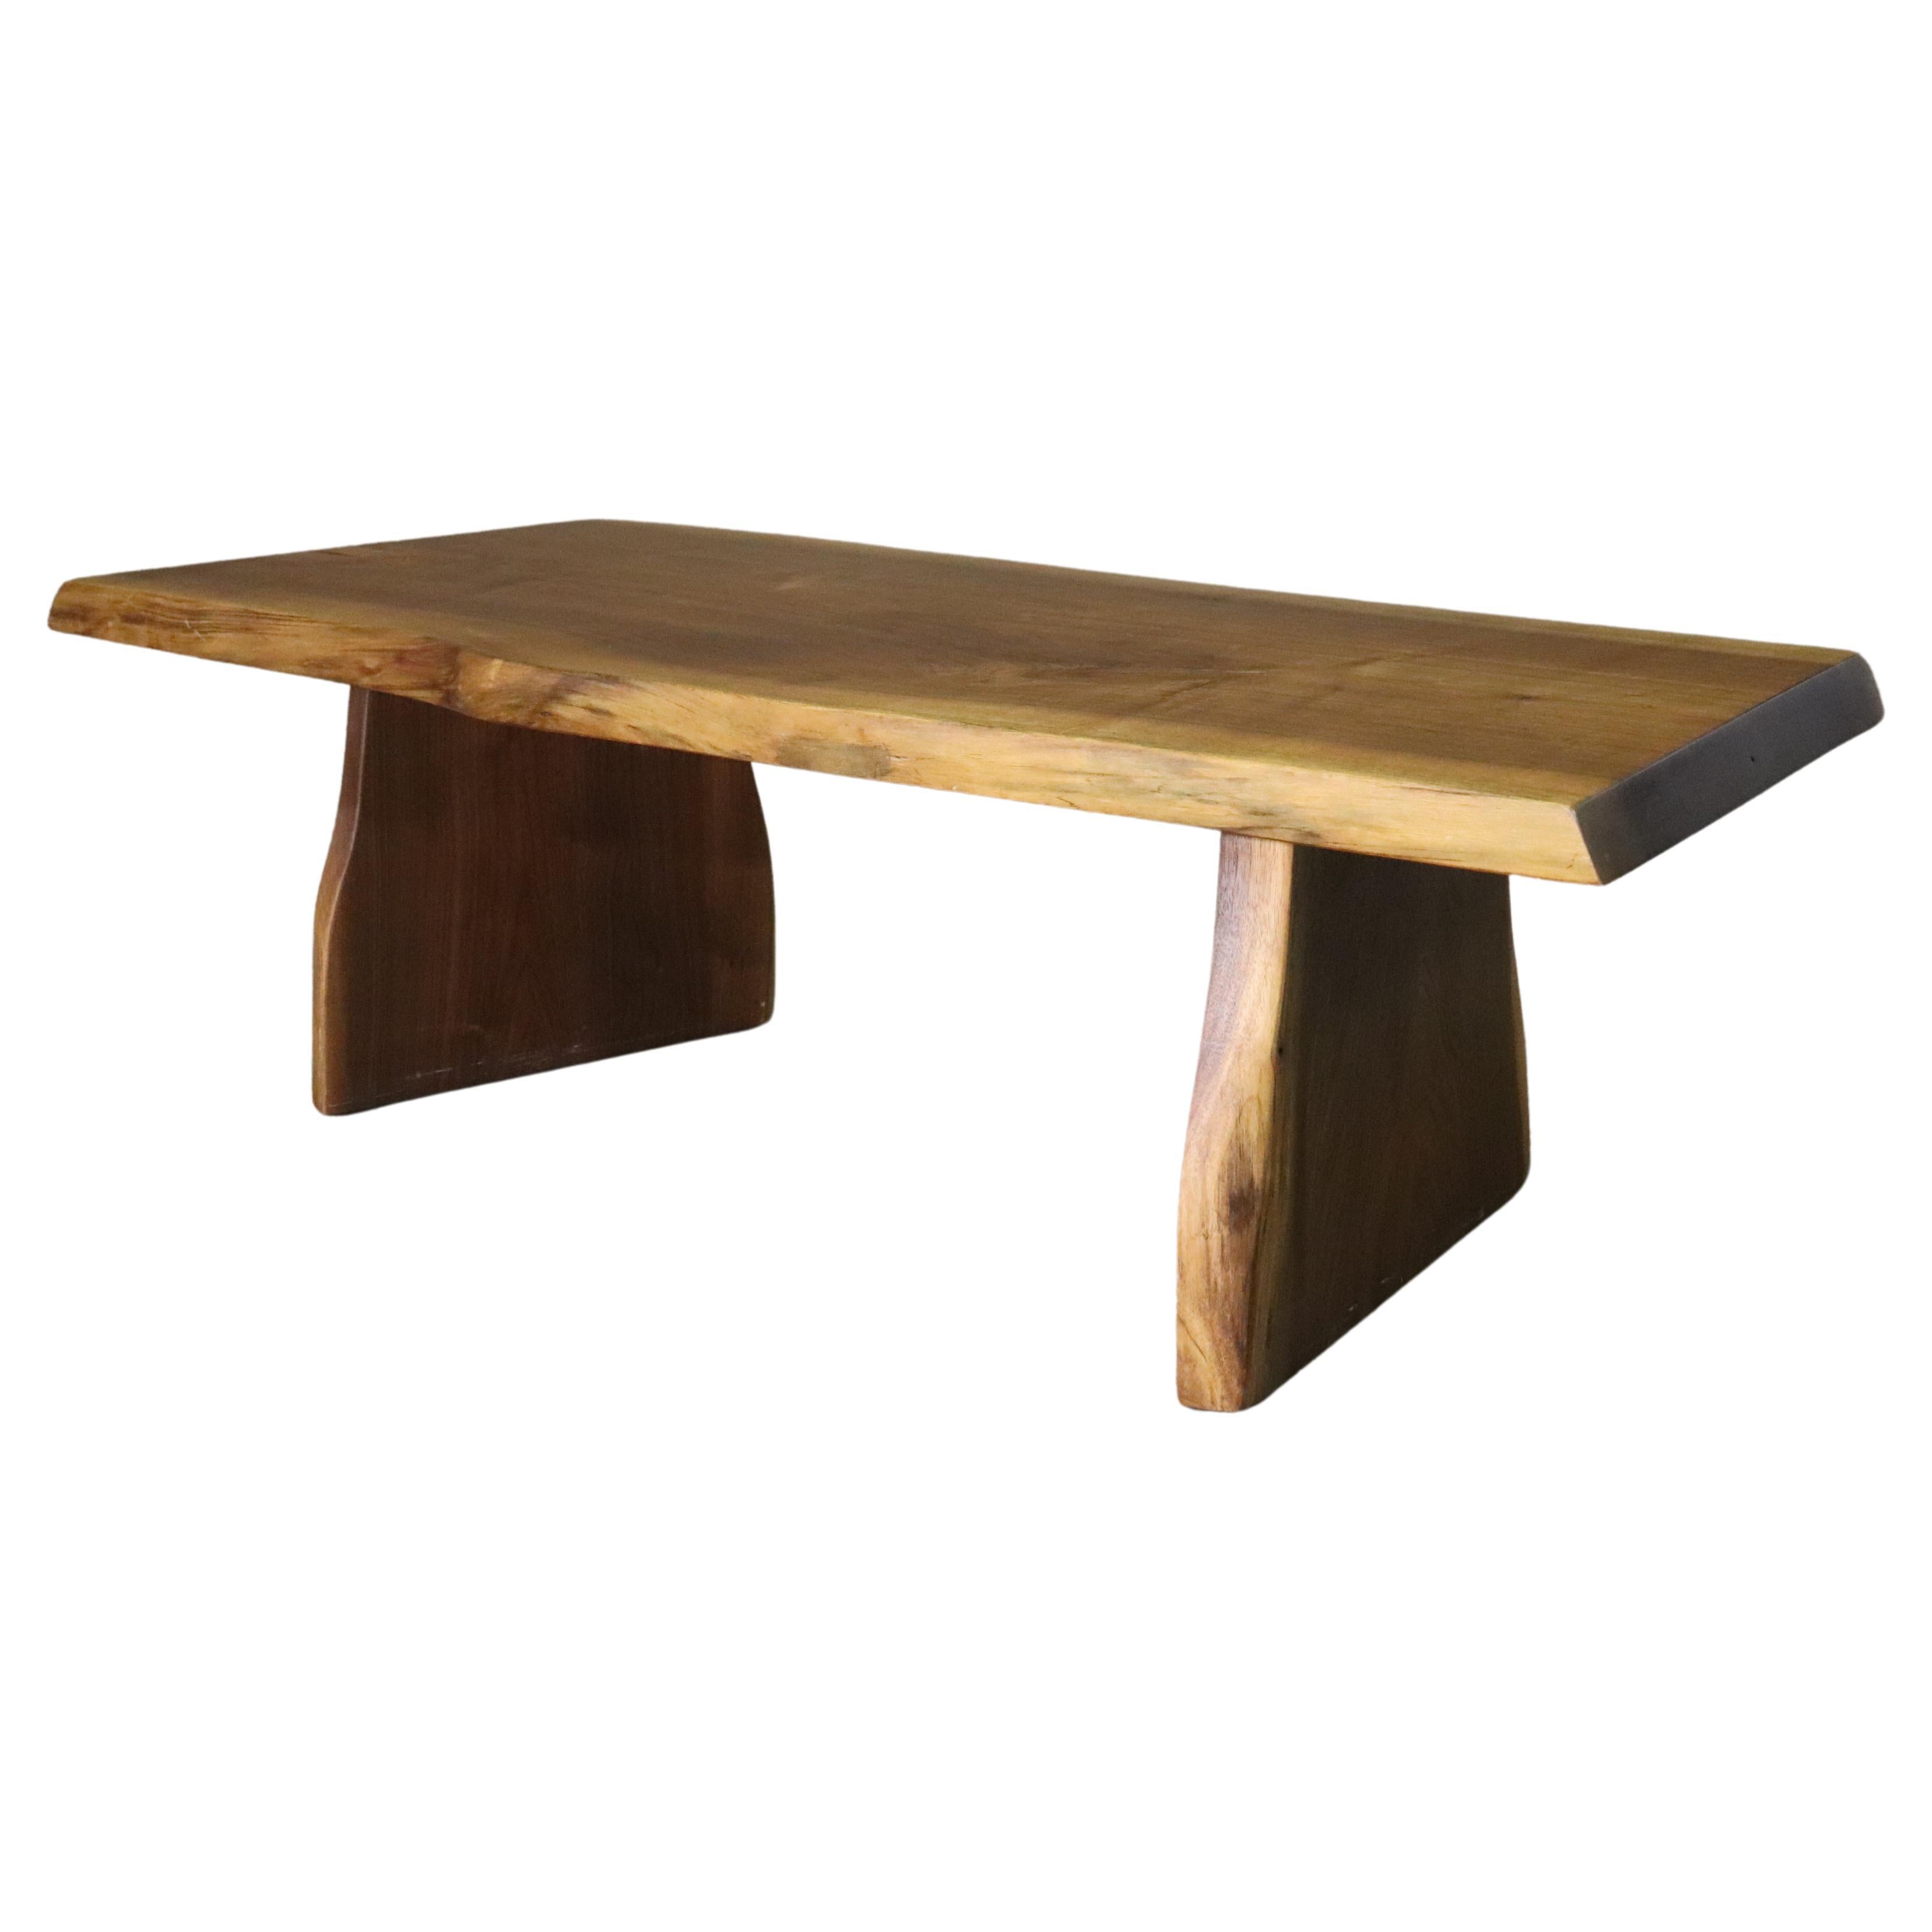 Beautifully constructed slab coffee table by Jeffrey Greene. Mid-century modern style live edge board with great color.
Please confirm location NY or NJ